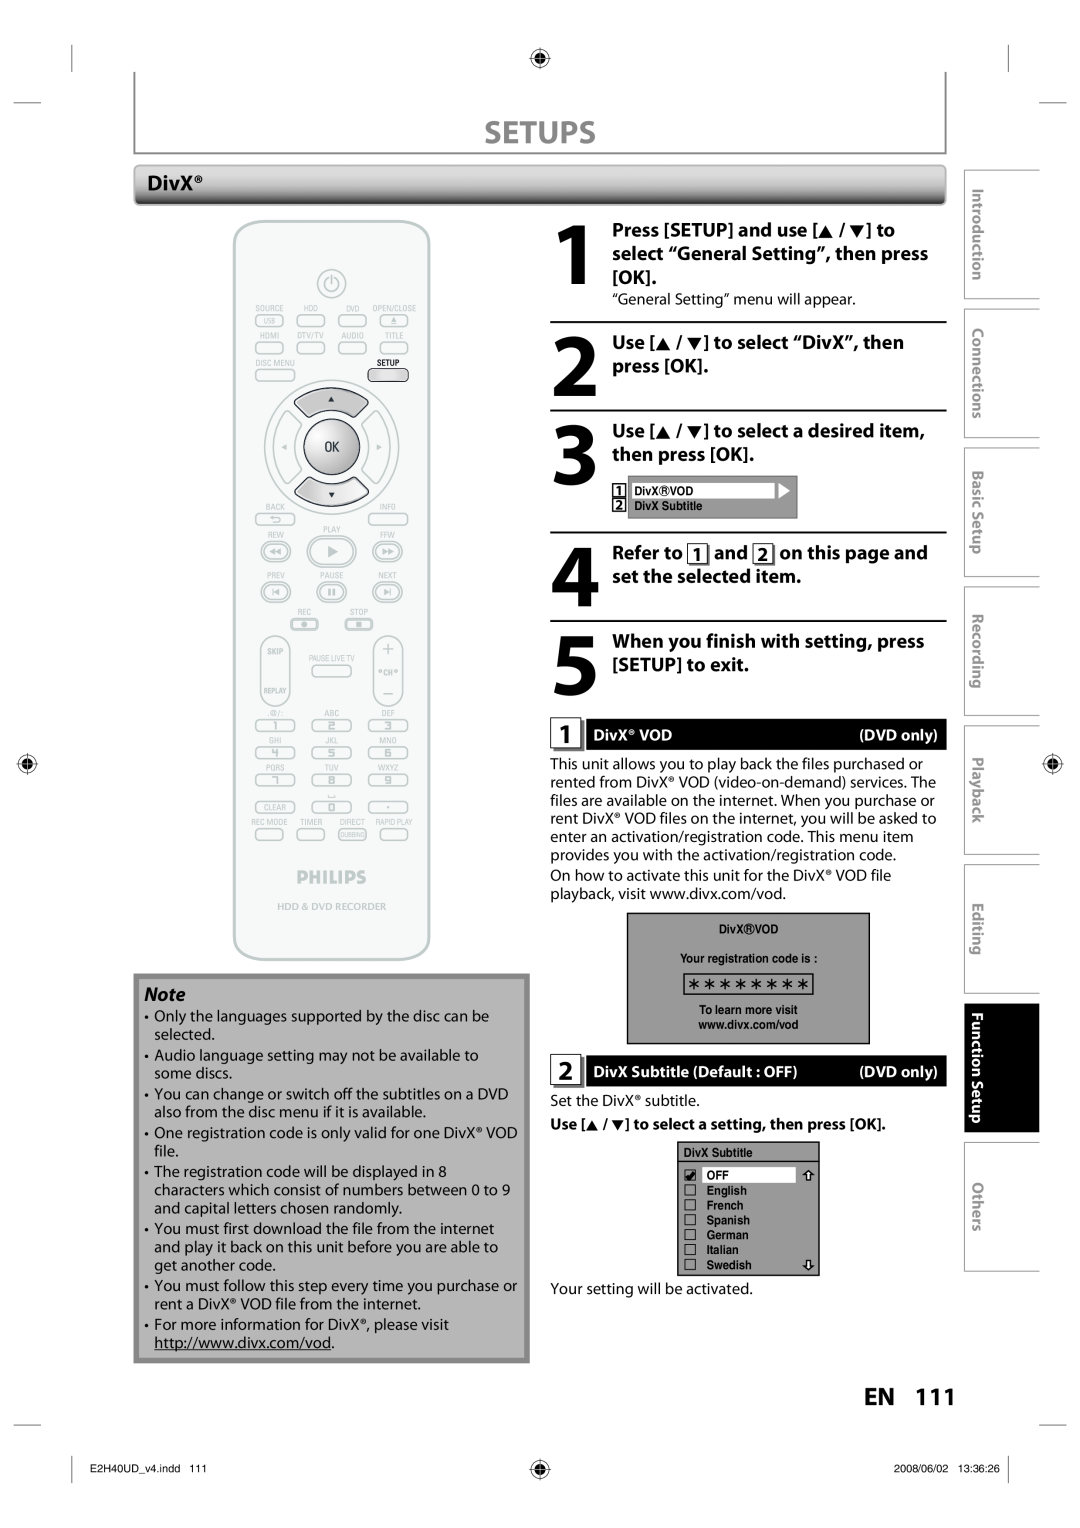 Philips DVDR3575H/37 Use K / L to select “DivX”, then, press OK, Use K / L to select a desired item, on this page and 